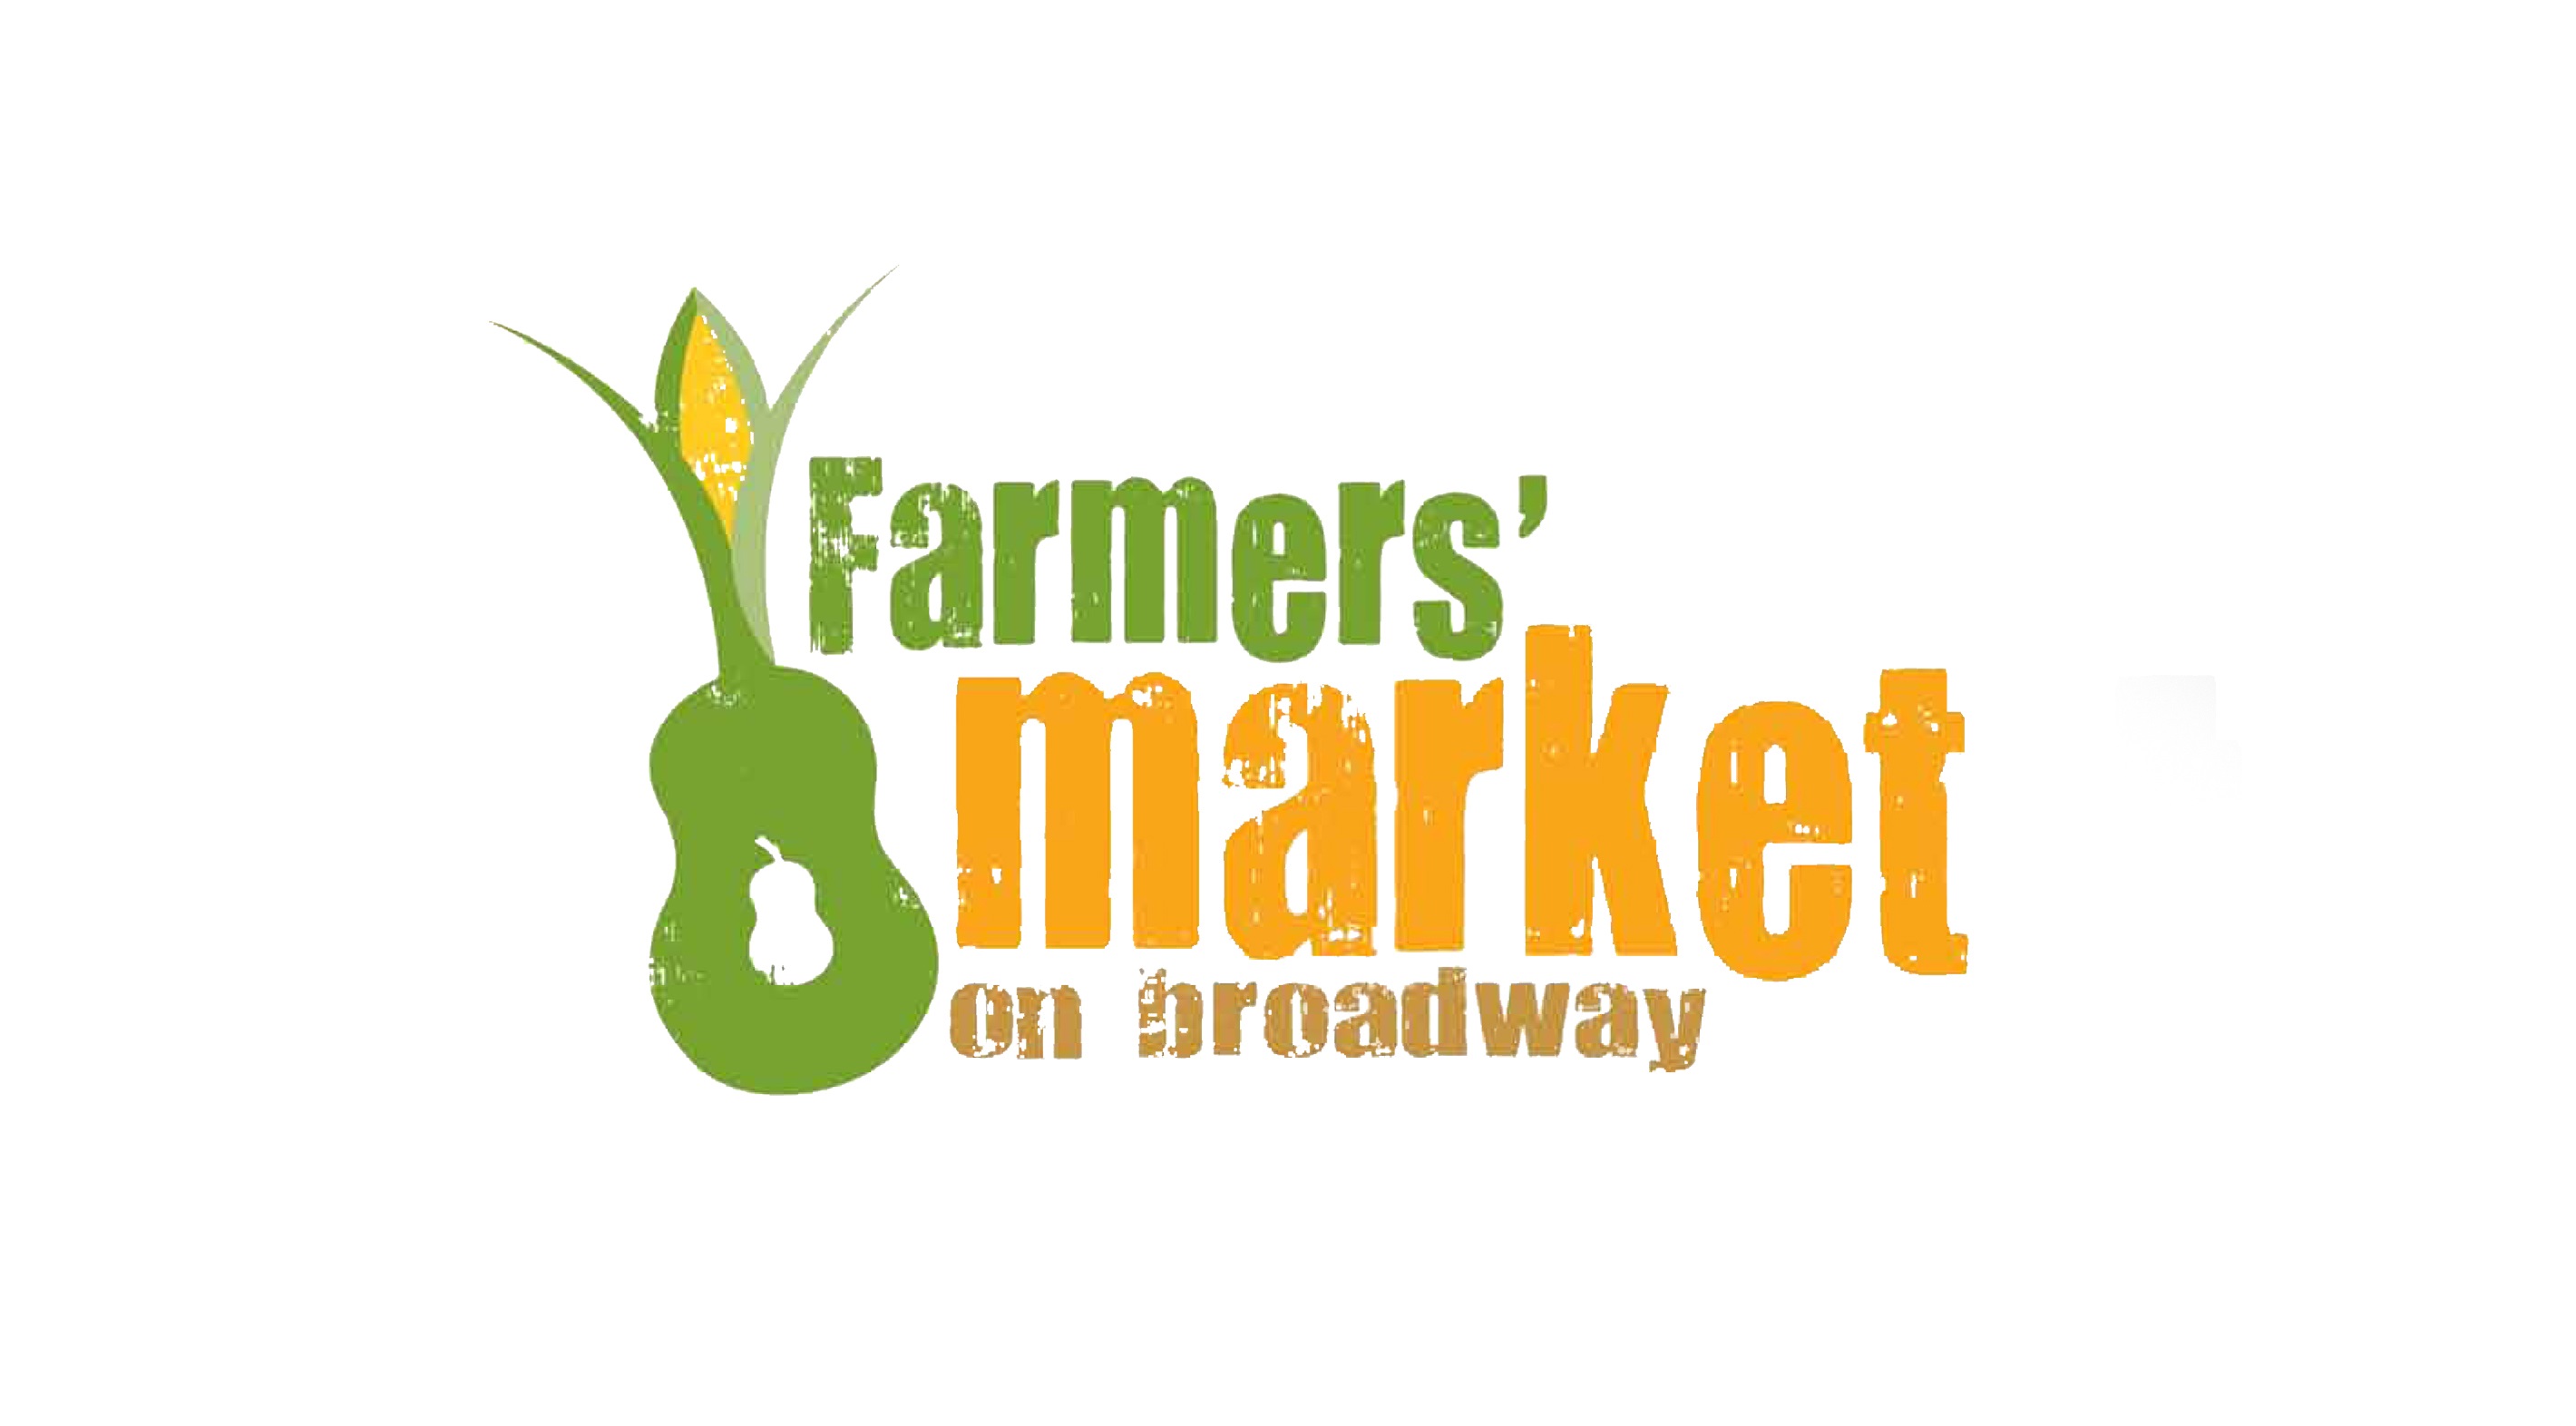 Join WOGB at The Farmers Market on Broadway!